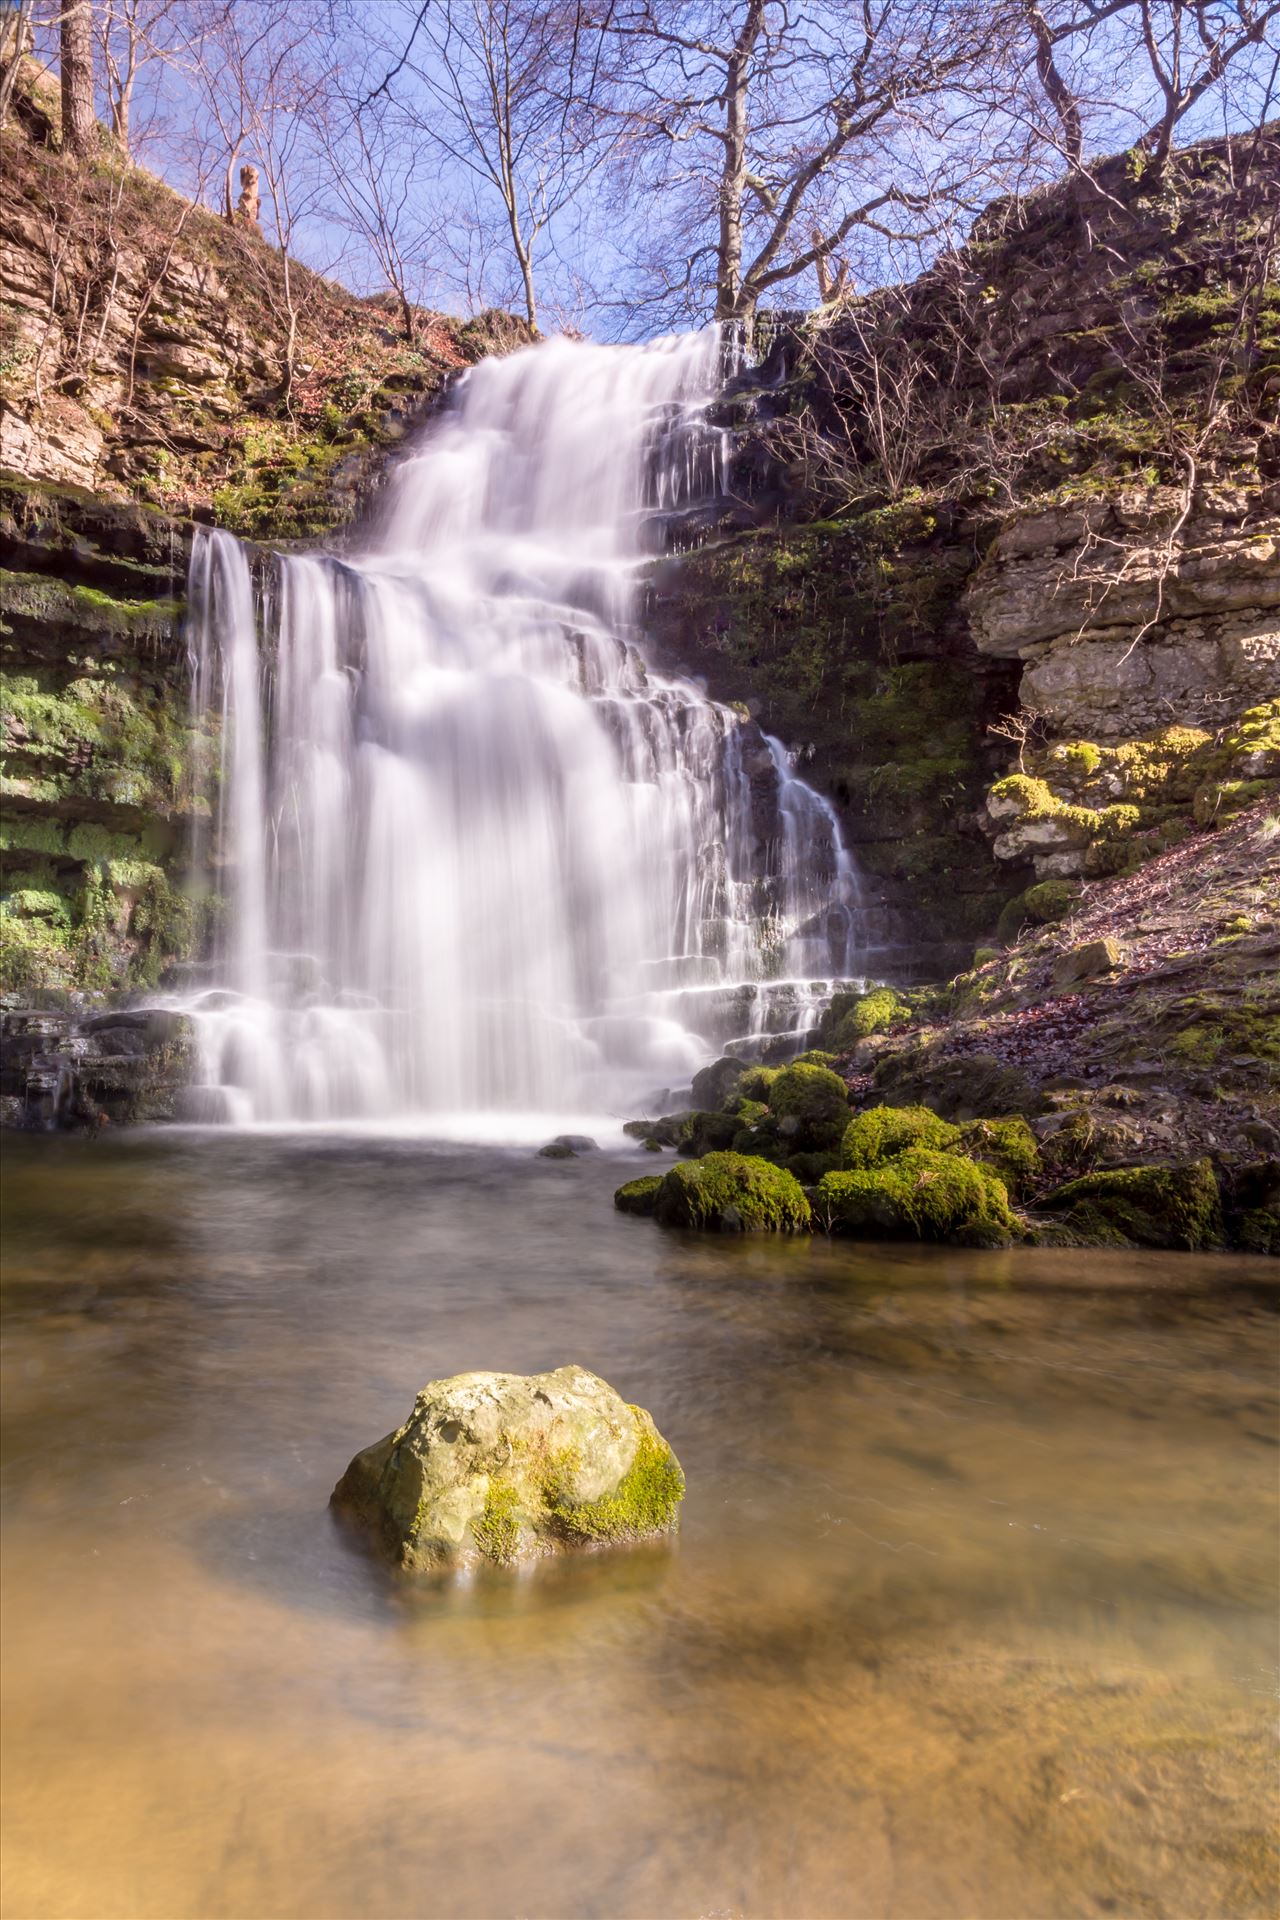 Scaleber Force - Scaleber Force,a stunning 40ft waterfall, is in a lovely location a mile or so above Settle in Ribblesdale on the road to Kirkby Malham in the Yorkshire Dales. by philreay